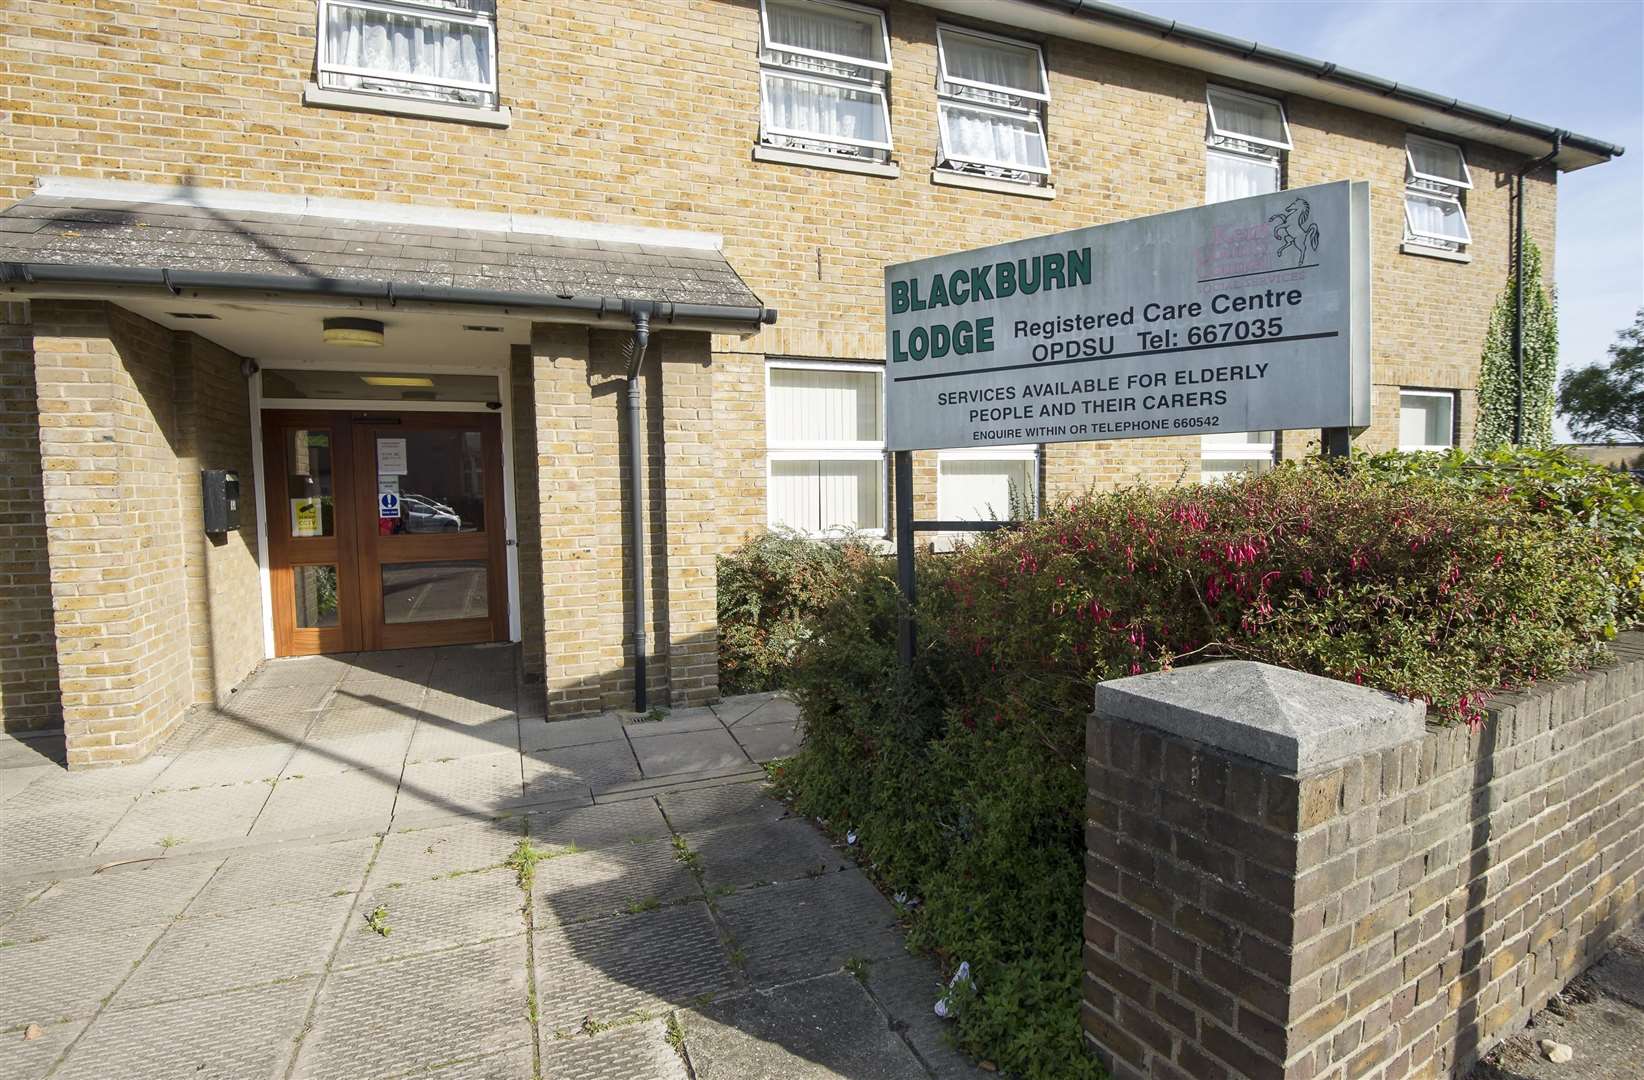 The entrance to the care home